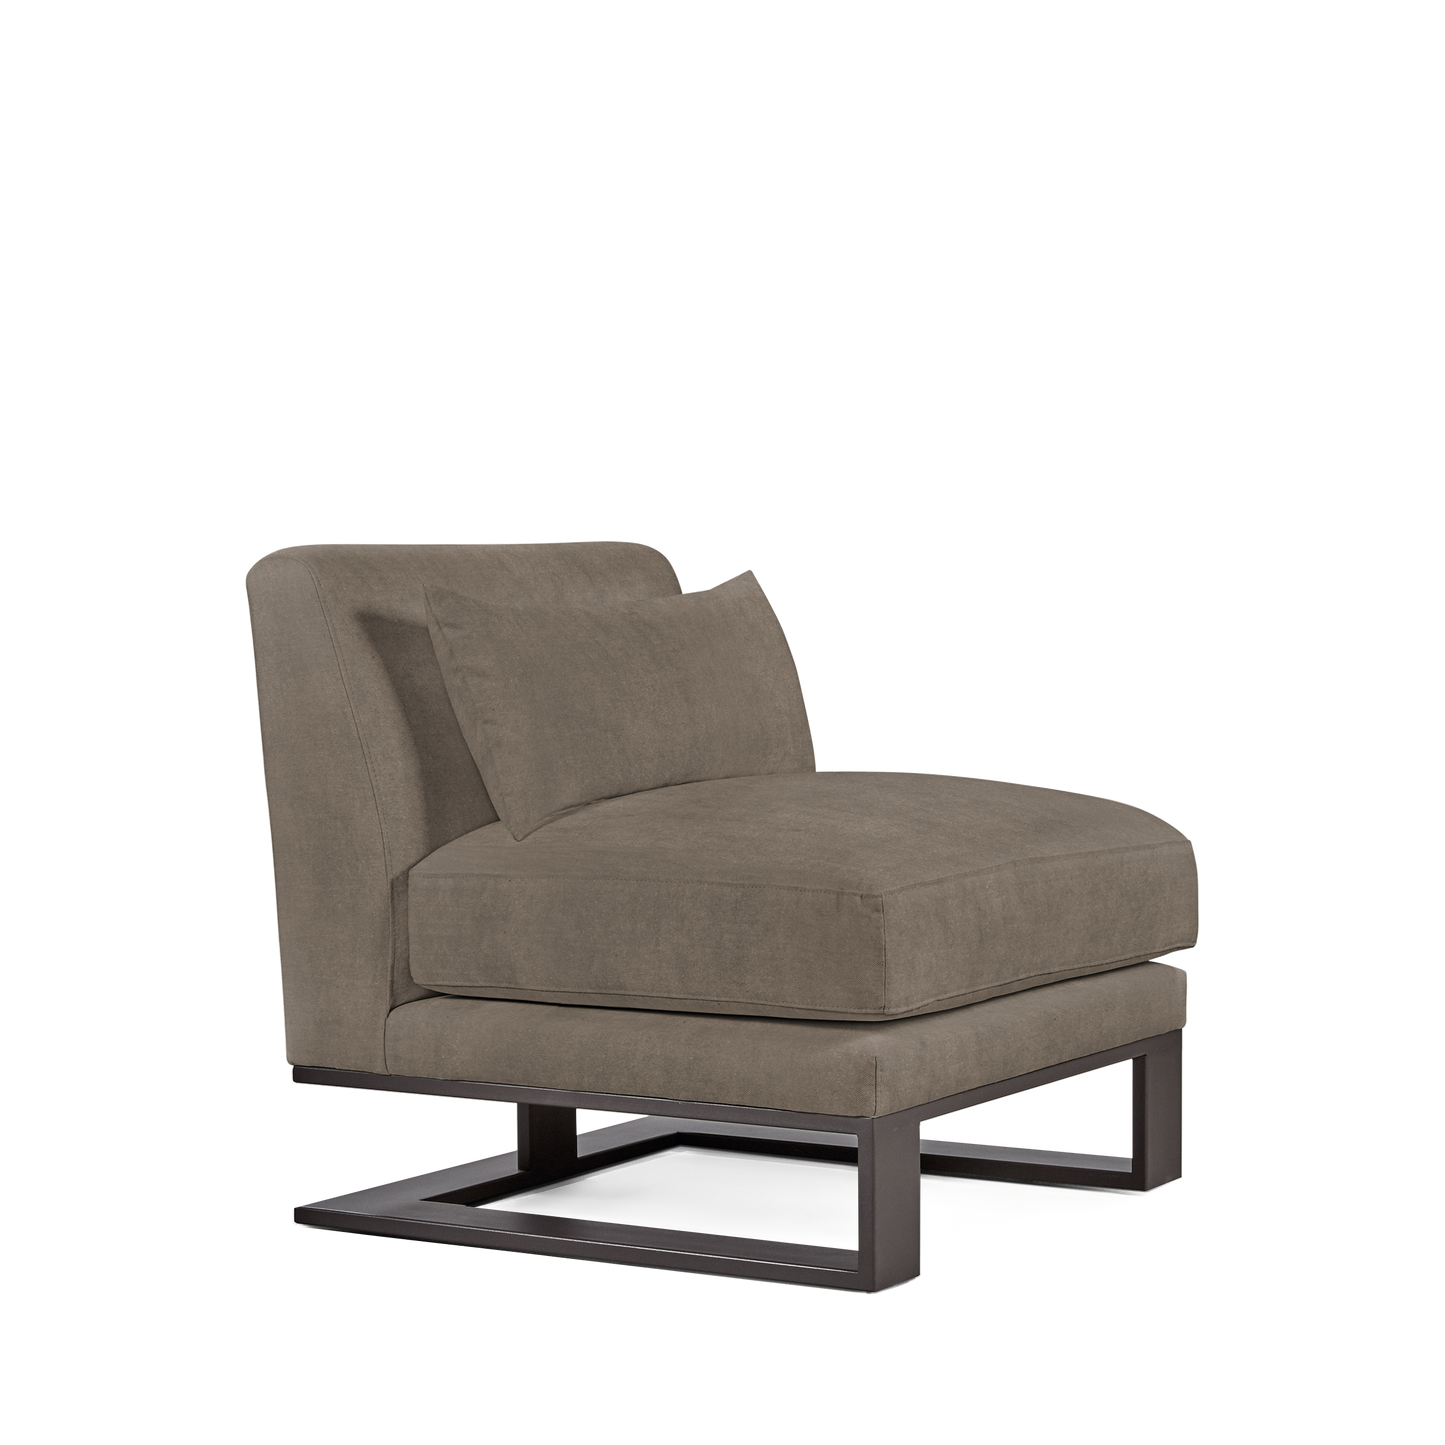 Alpes armchair with suede grey textile and moka colored wood legs 